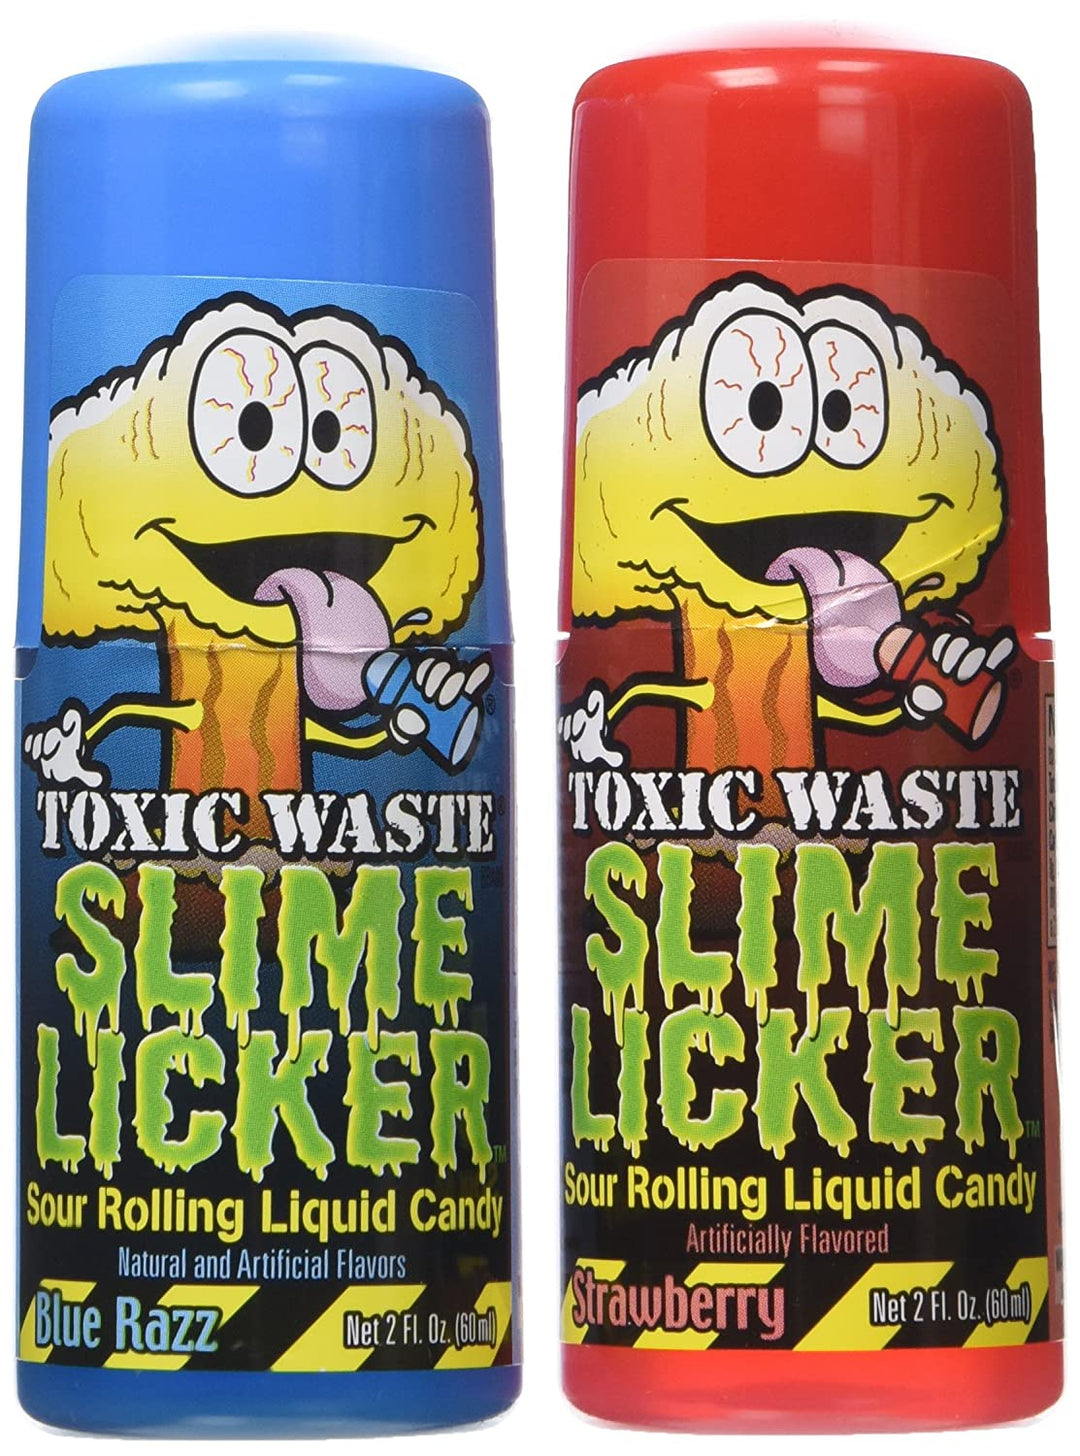 Toxic Waste Slime Licker 60 ml Snaxies Exotic Candy Montreal Canada